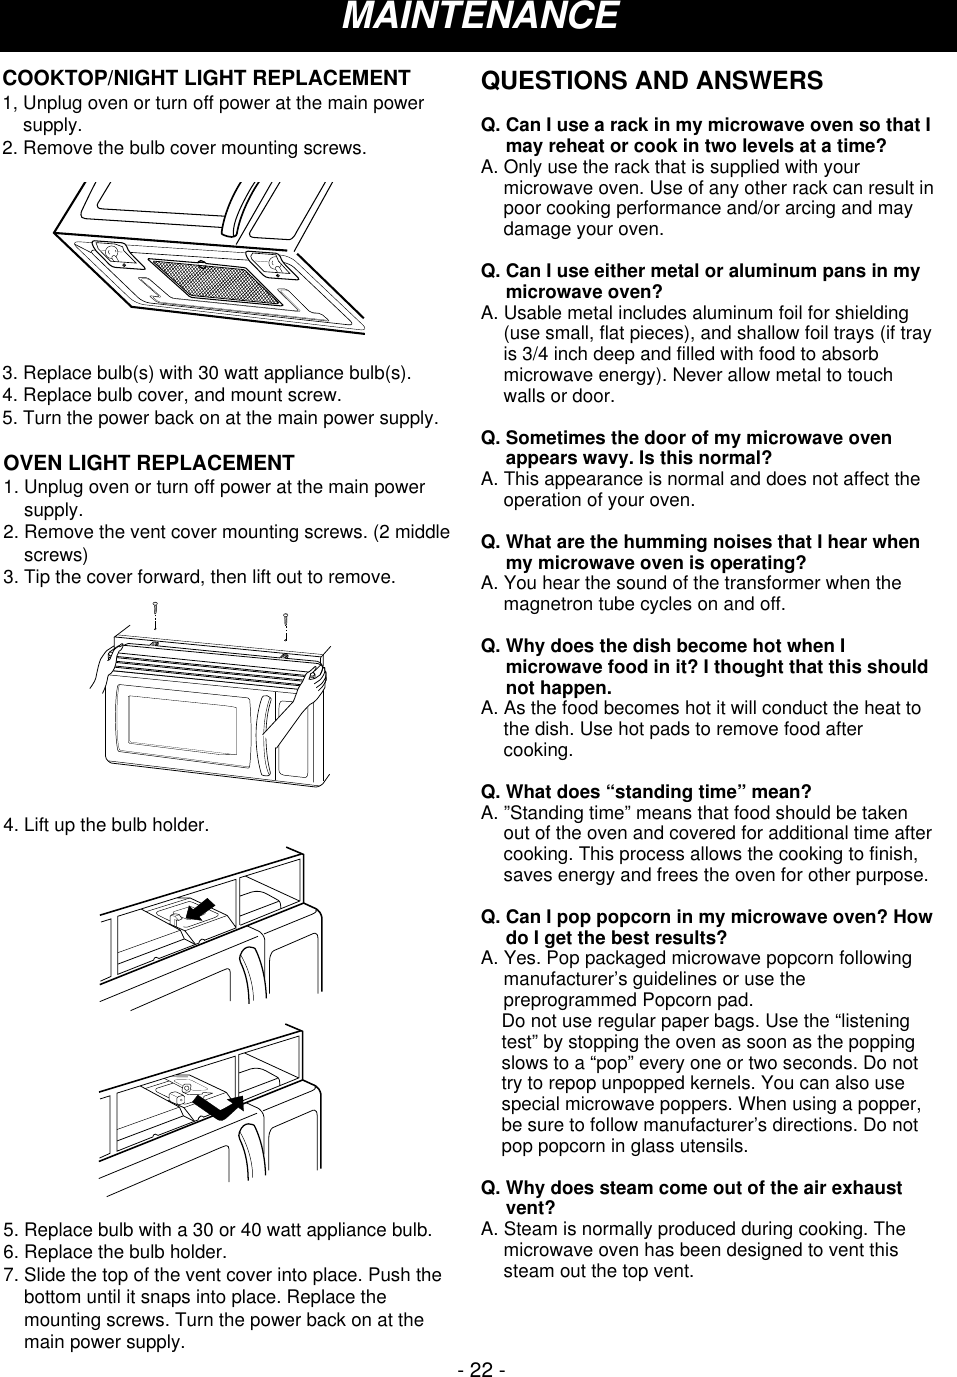 - 22 -MAINTENANCEOVEN LIGHT REPLACEMENT1. Unplug oven or turn off power at the main powersupply.2. Remove the vent cover mounting screws. (2 middlescrews)3. Tip the cover forward, then lift out to remove.4. Lift up the bulb holder.5. Replace bulb with a 30 or 40 watt appliance bulb.6. Replace the bulb holder.7. Slide the top of the vent cover into place. Push thebottom until it snaps into place. Replace themounting screws. Turn the power back on at themain power supply. COOKTOP/NIGHT LIGHT REPLACEMENT1, Unplug oven or turn off power at the main powersupply.2. Remove the bulb cover mounting screws.3. Replace bulb(s) with 30 watt appliance bulb(s).4. Replace bulb cover, and mount screw.5. Turn the power back on at the main power supply.QUESTIONS AND ANSWERSQ. Can I use a rack in my microwave oven so that Imay reheat or cook in two levels at a time?A. Only use the rack that is supplied with yourmicrowave oven. Use of any other rack can result inpoor cooking performance and/or arcing and maydamage your oven.Q. Can I use either metal or aluminum pans in mymicrowave oven?A. Usable metal includes aluminum foil for shielding(use small, flat pieces), and shallow foil trays (if trayis 3/4 inch deep and filled with food to absorbmicrowave energy). Never allow metal to touchwalls or door.Q. Sometimes the door of my microwave ovenappears wavy. Is this normal?A. This appearance is normal and does not affect theoperation of your oven.Q. What are the humming noises that I hear whenmy microwave oven is operating?A. You hear the sound of the transformer when themagnetron tube cycles on and off.Q. Why does the dish become hot when Imicrowave food in it? I thought that this shouldnot happen.A. As the food becomes hot it will conduct the heat tothe dish. Use hot pads to remove food aftercooking.Q. What does “standing time” mean?A. ”Standing time” means that food should be takenout of the oven and covered for additional time aftercooking. This process allows the cooking to finish,saves energy and frees the oven for other purpose.Q. Can I pop popcorn in my microwave oven? Howdo I get the best results?A. Yes. Pop packaged microwave popcorn followingmanufacturer’s guidelines or use thepreprogrammed Popcorn pad.     Do not use regular paper bags. Use the “listeningtest” by stopping the oven as soon as the poppingslows to a “pop” every one or two seconds. Do nottry to repop unpopped kernels. You can also usespecial microwave poppers. When using a popper,be sure to follow manufacturer’s directions. Do notpop popcorn in glass utensils.Q. Why does steam come out of the air exhaustvent?A. Steam is normally produced during cooking. Themicrowave oven has been designed to vent thissteam out the top vent.